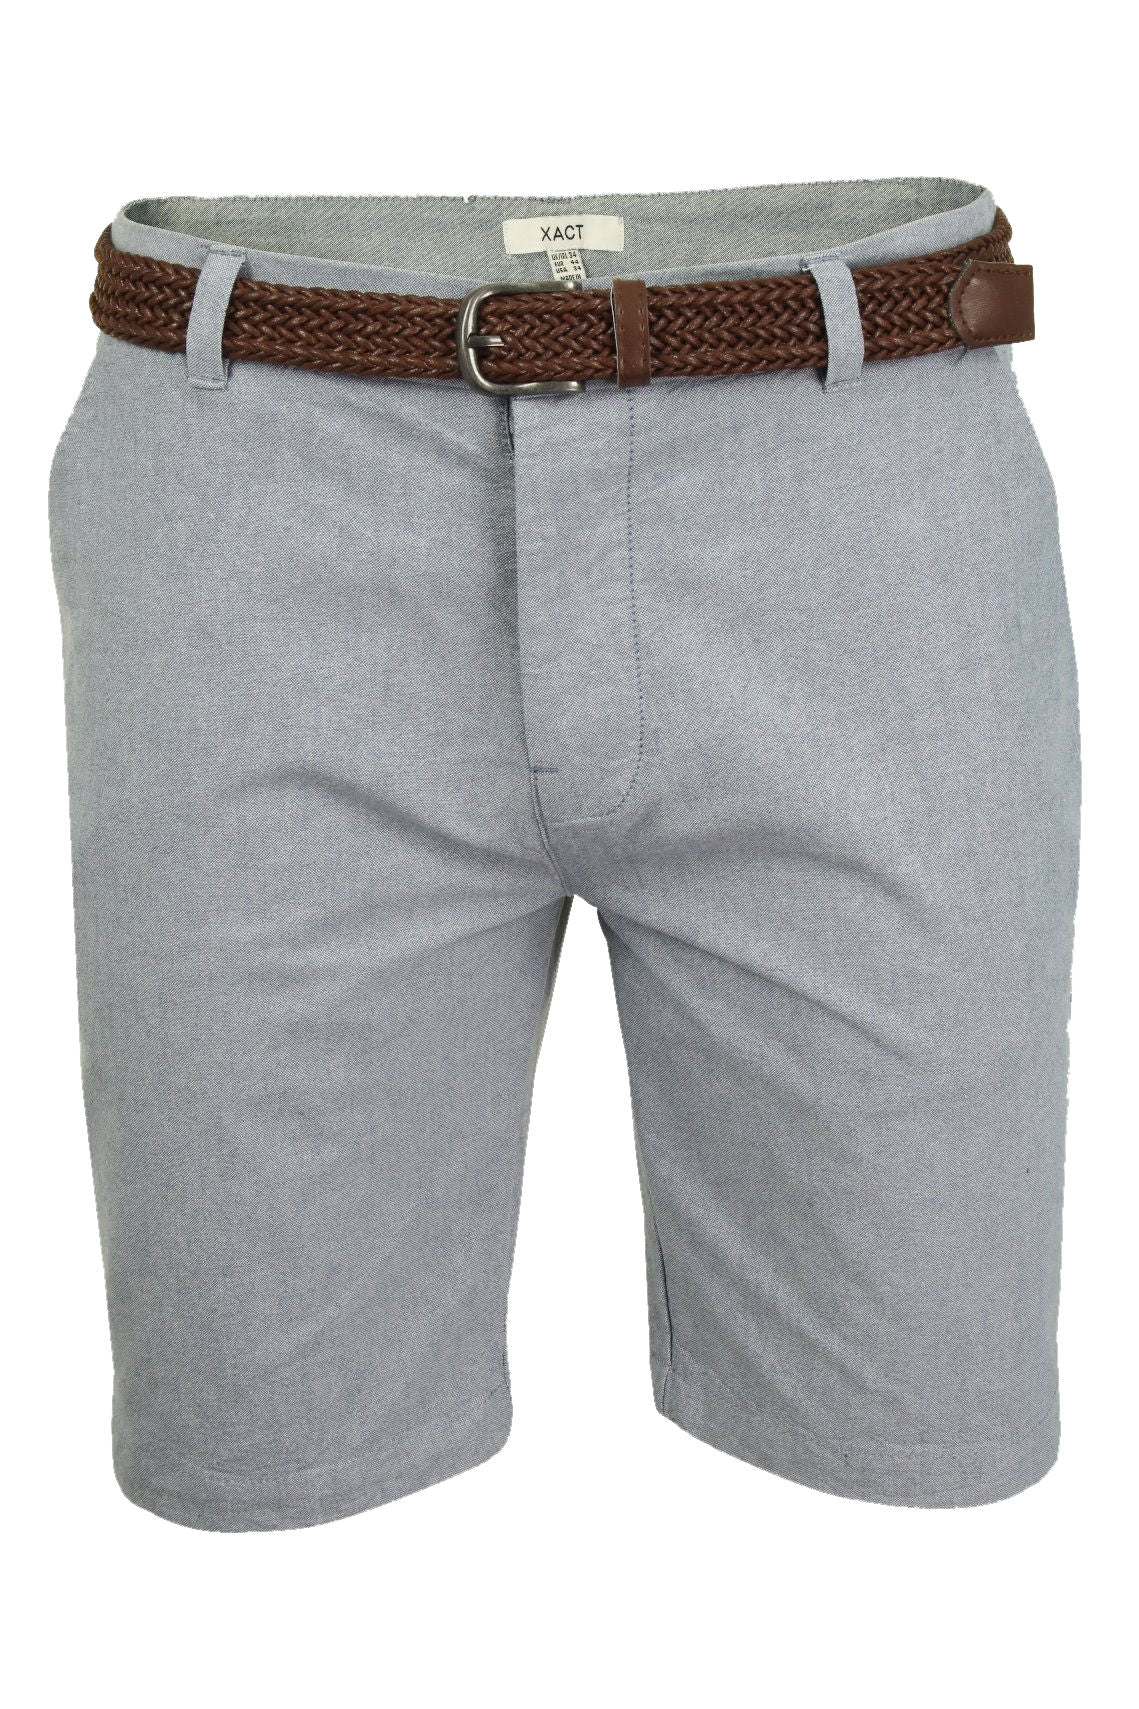 Xact Mens Oxford Chino Shorts with Belt, 01, Xsrt1029, Oxford Navy (Brown Belt)